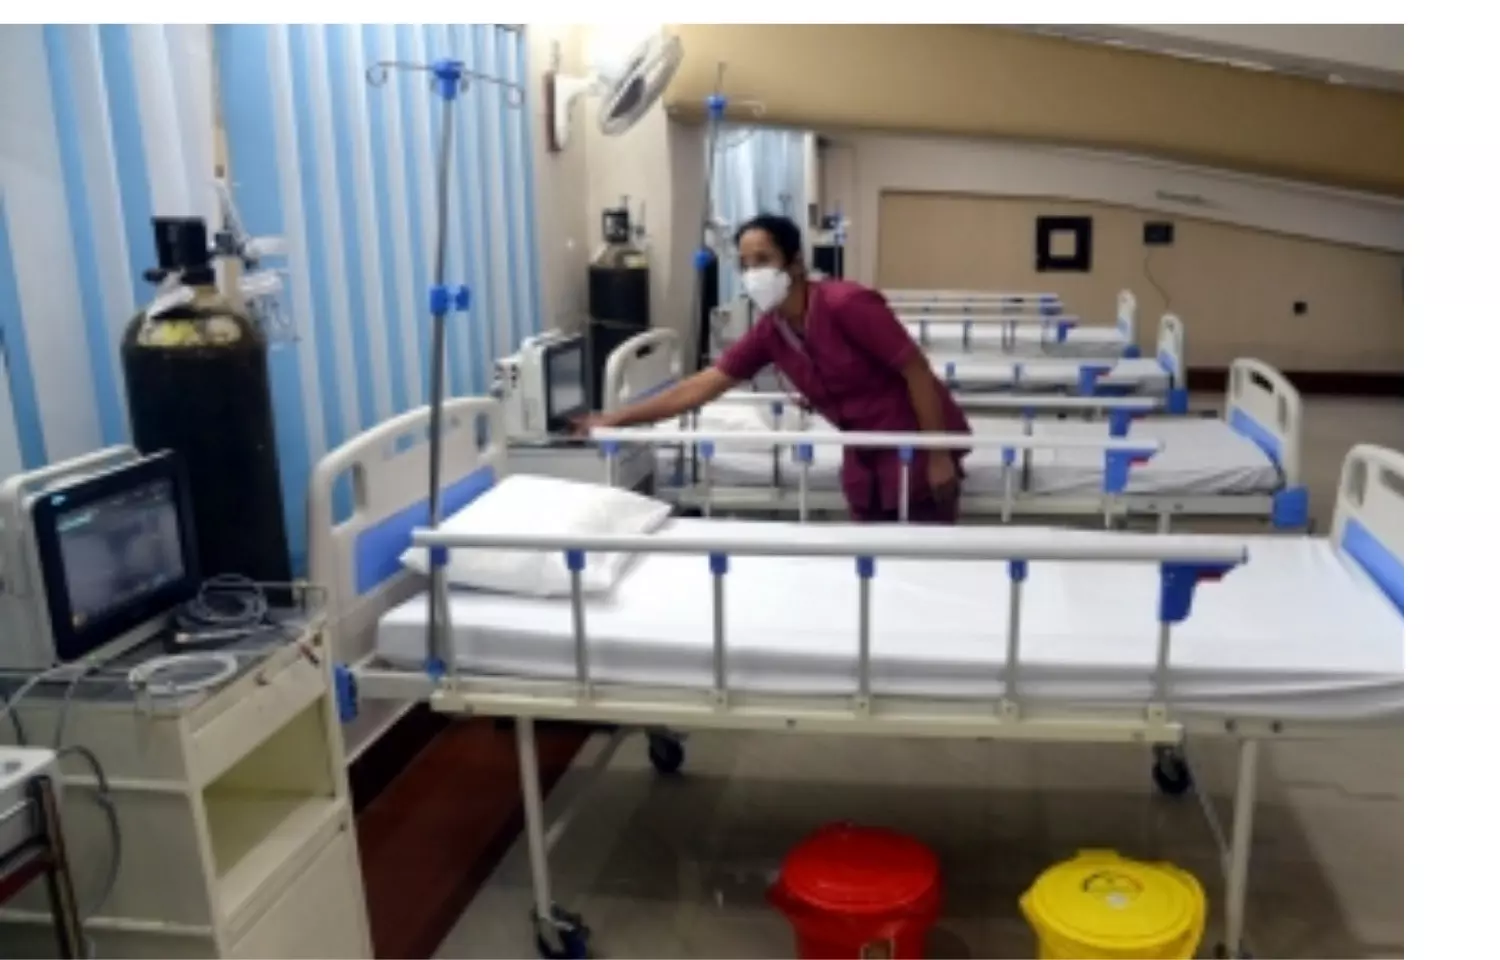 Delhi Govt directs hospitals to use one-third of COVID beds for dengue patients